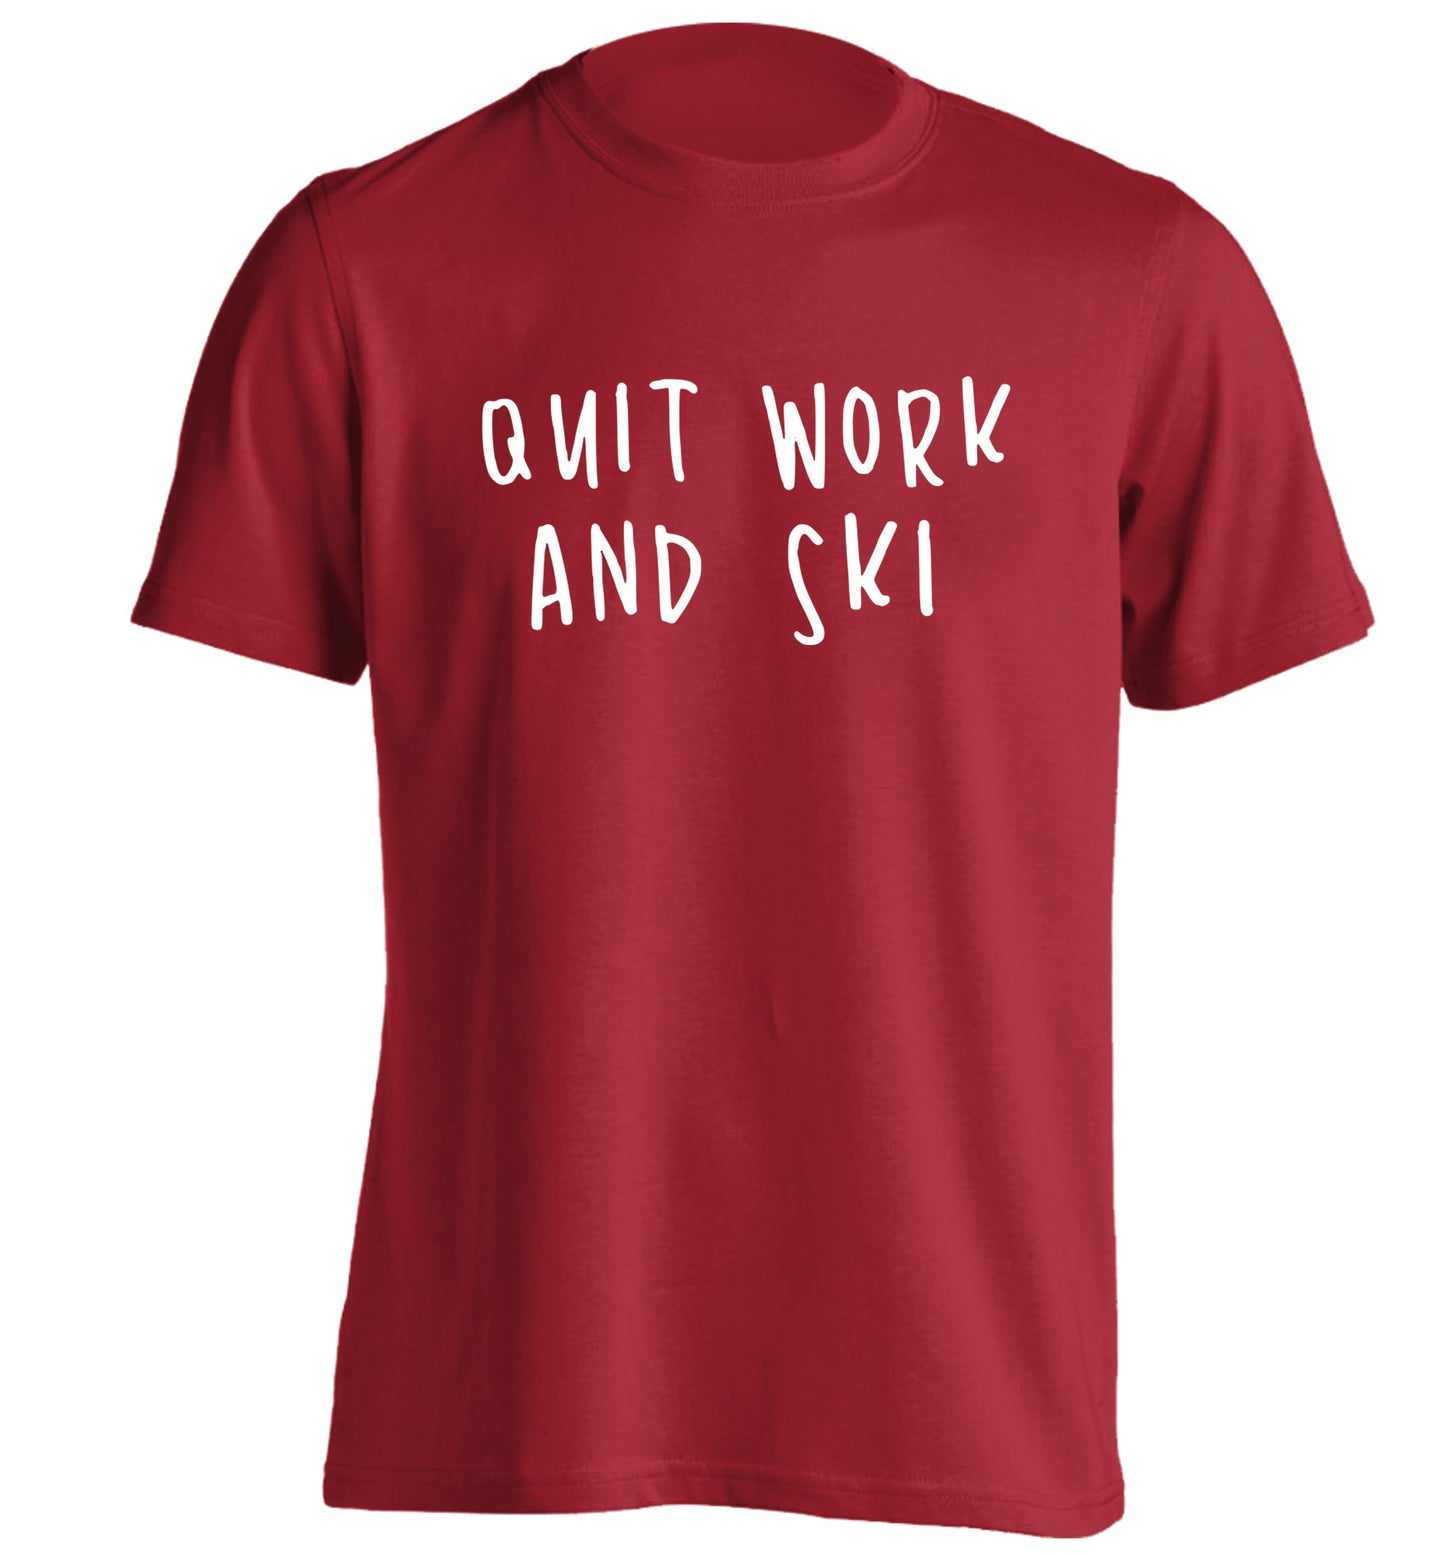 Quit work and ski adults unisexred Tshirt 2XL